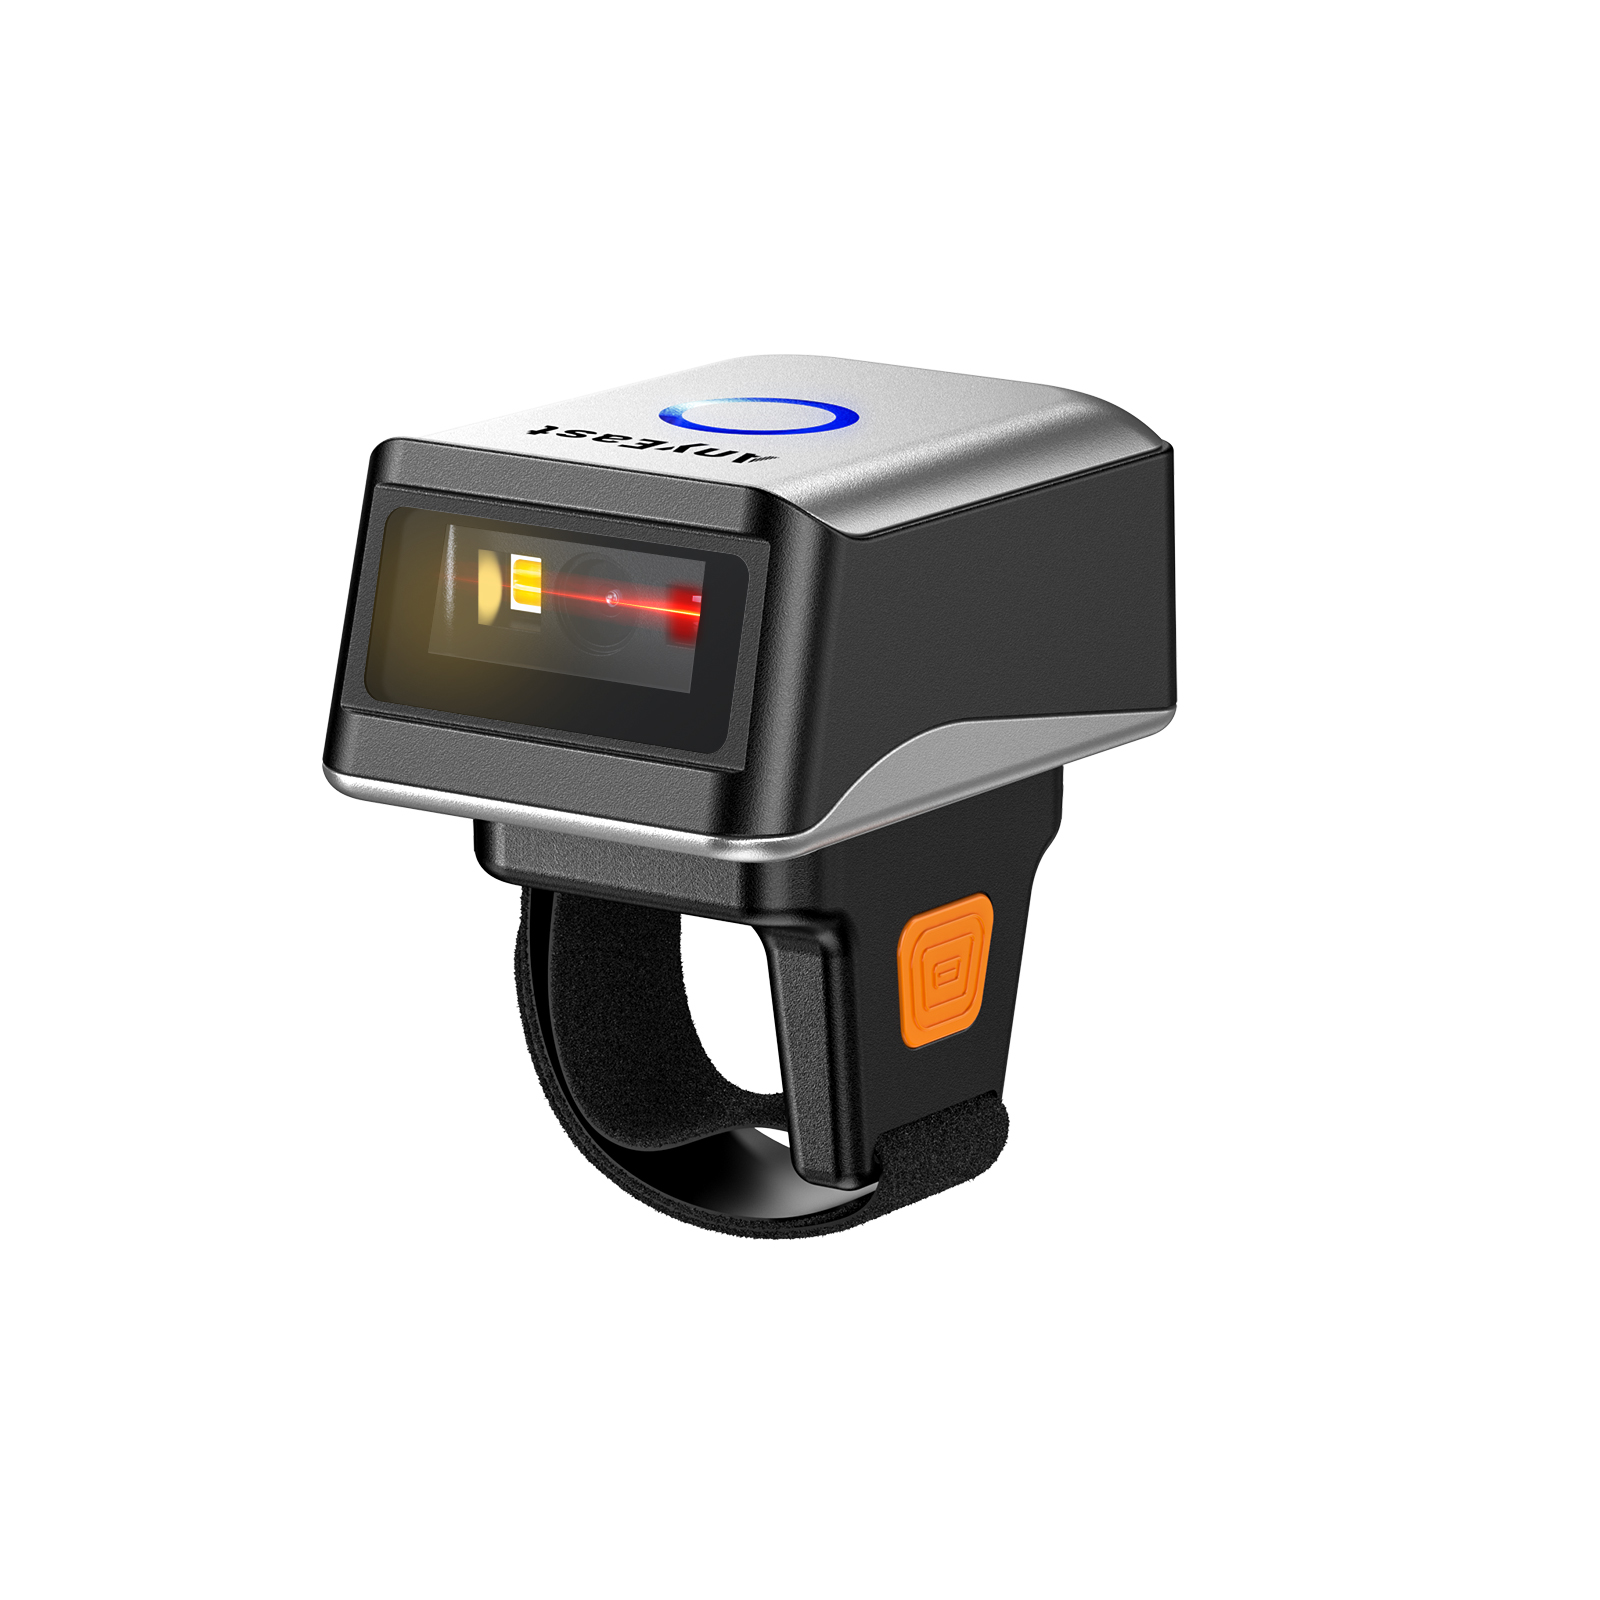 Barcode Scanner Scanning Types - Sorting and Delivering Orders